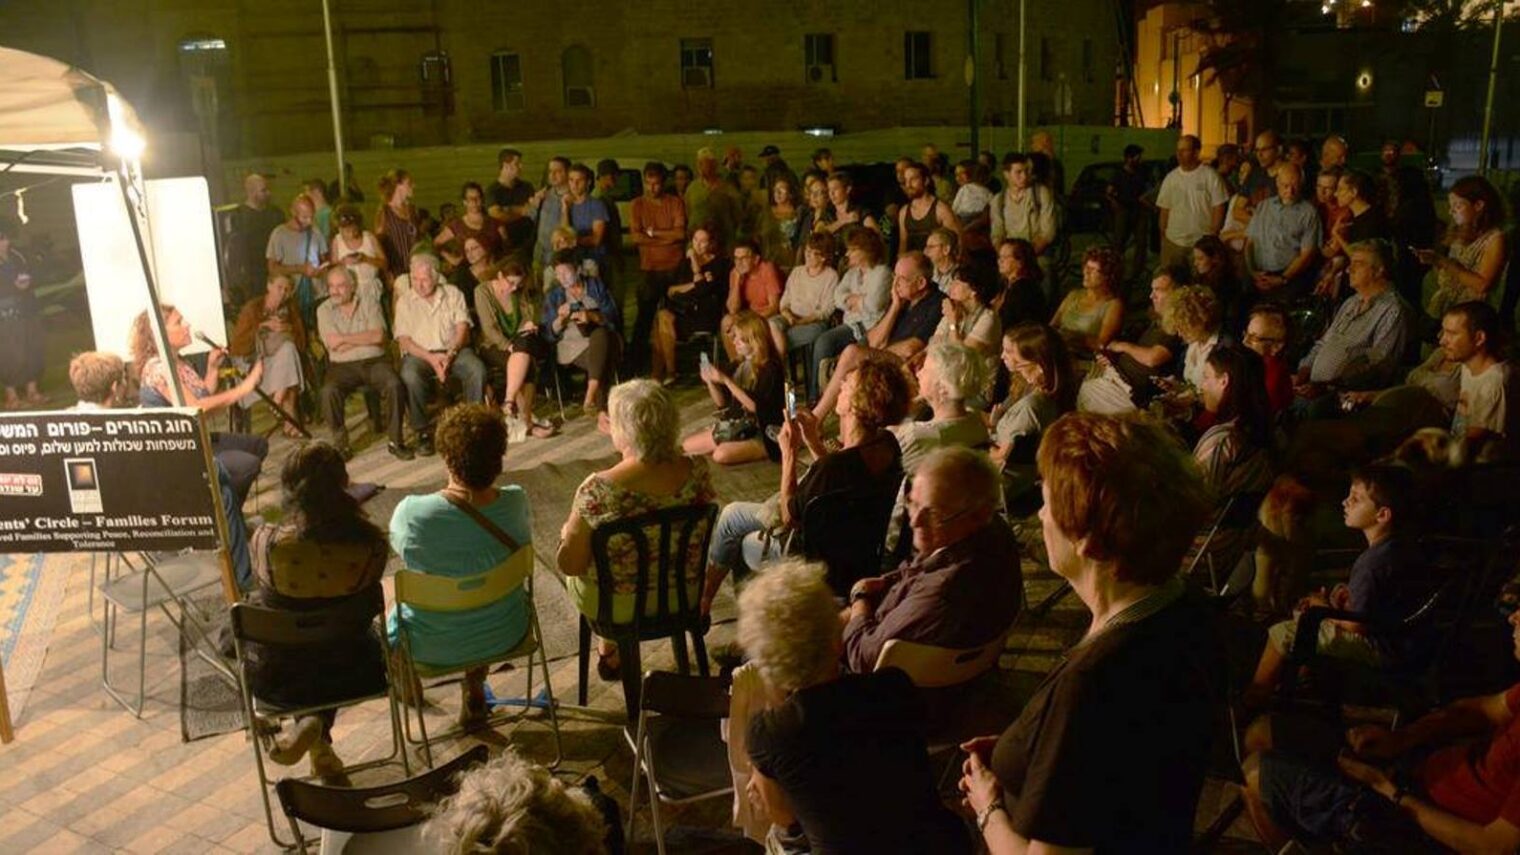 The Parents Circle staged a Peace Square in Jaffa where Arabs and Jews can meet, talk and share their feelings. Photo via Facebook